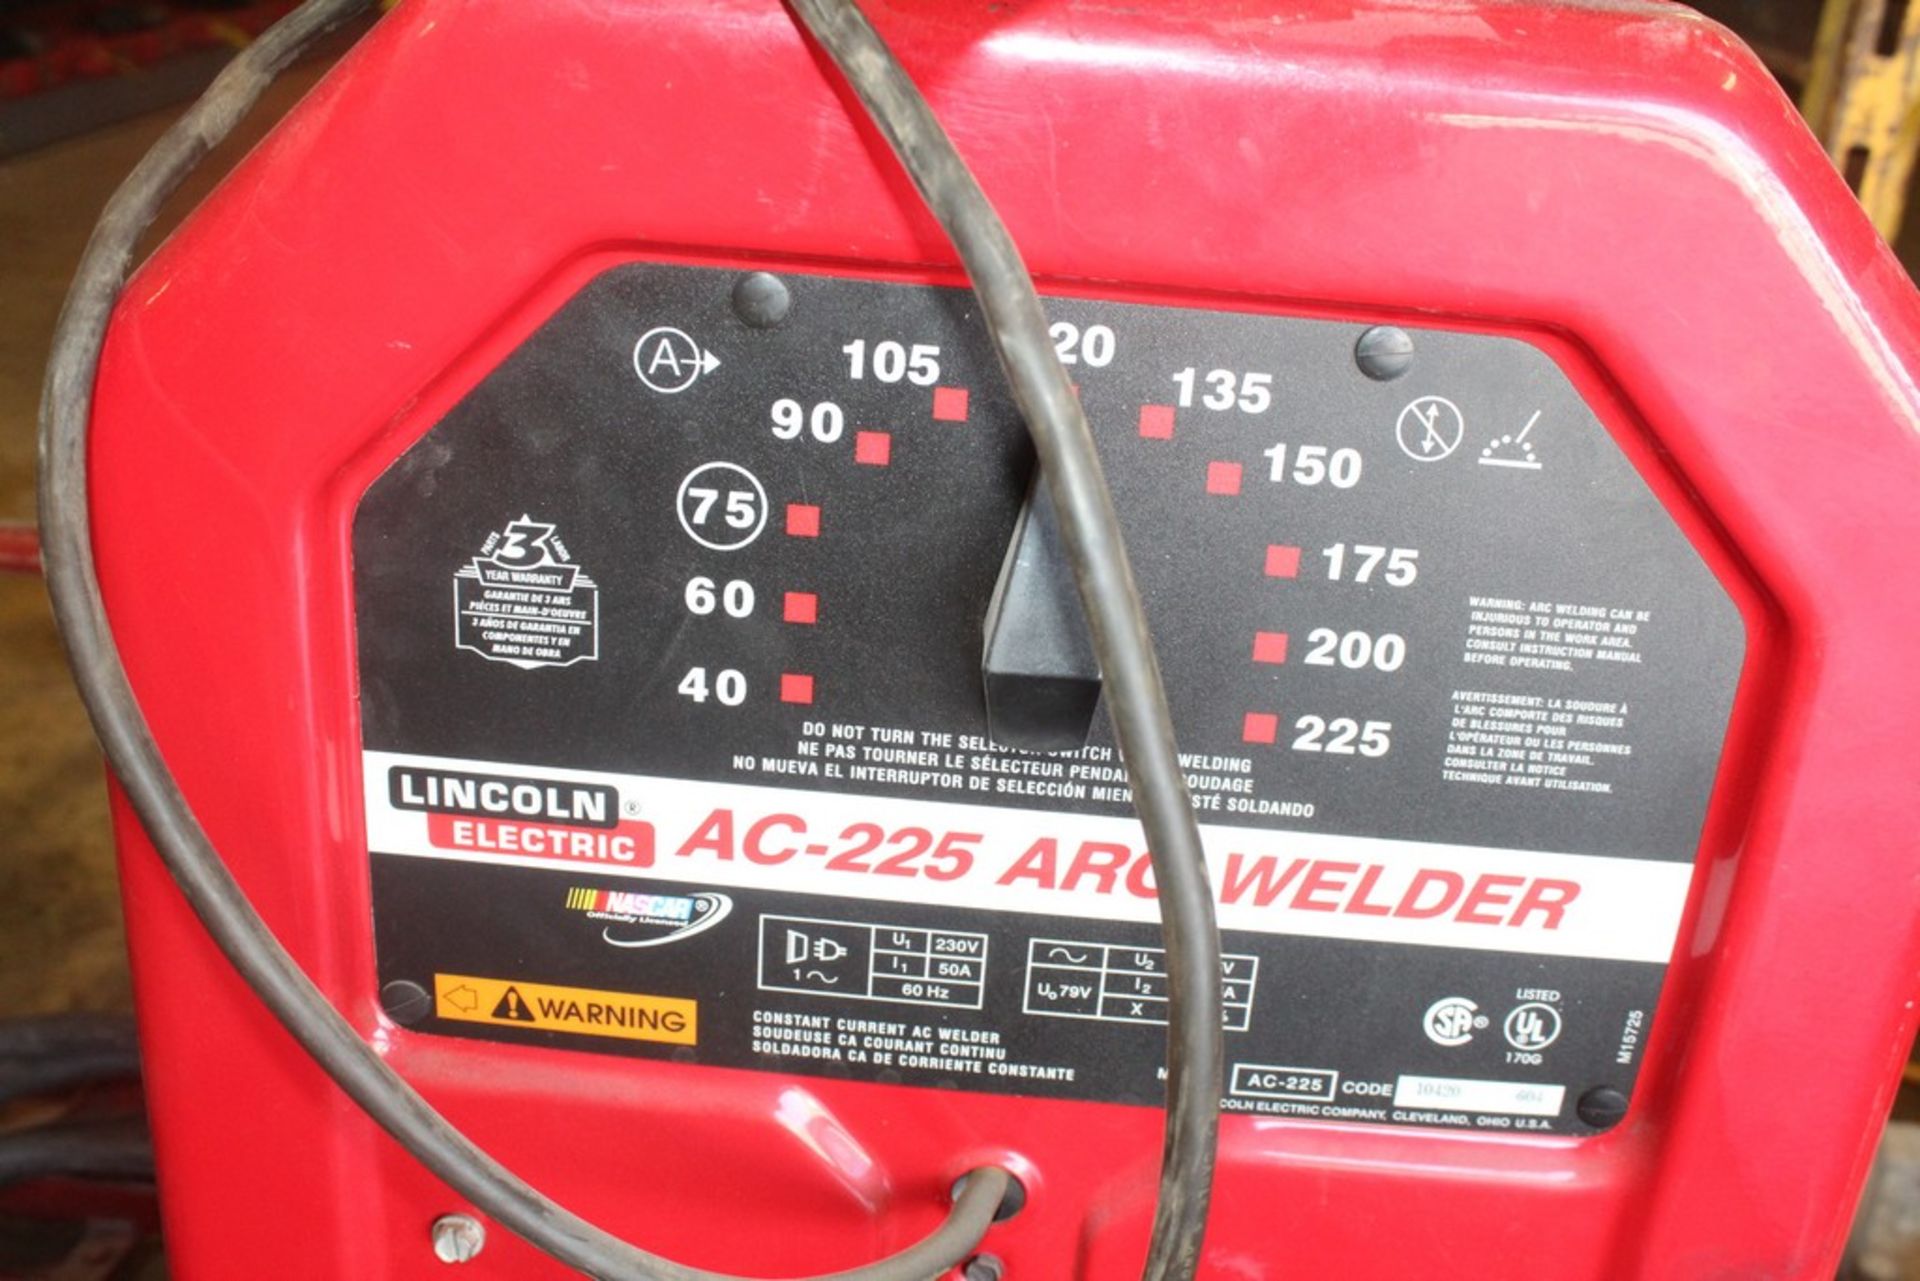 LINCOLN ELECTRIC MODEL AC-225 TOMBSTONE STYLE ARC WELDER, S/N 10420 - Image 2 of 2